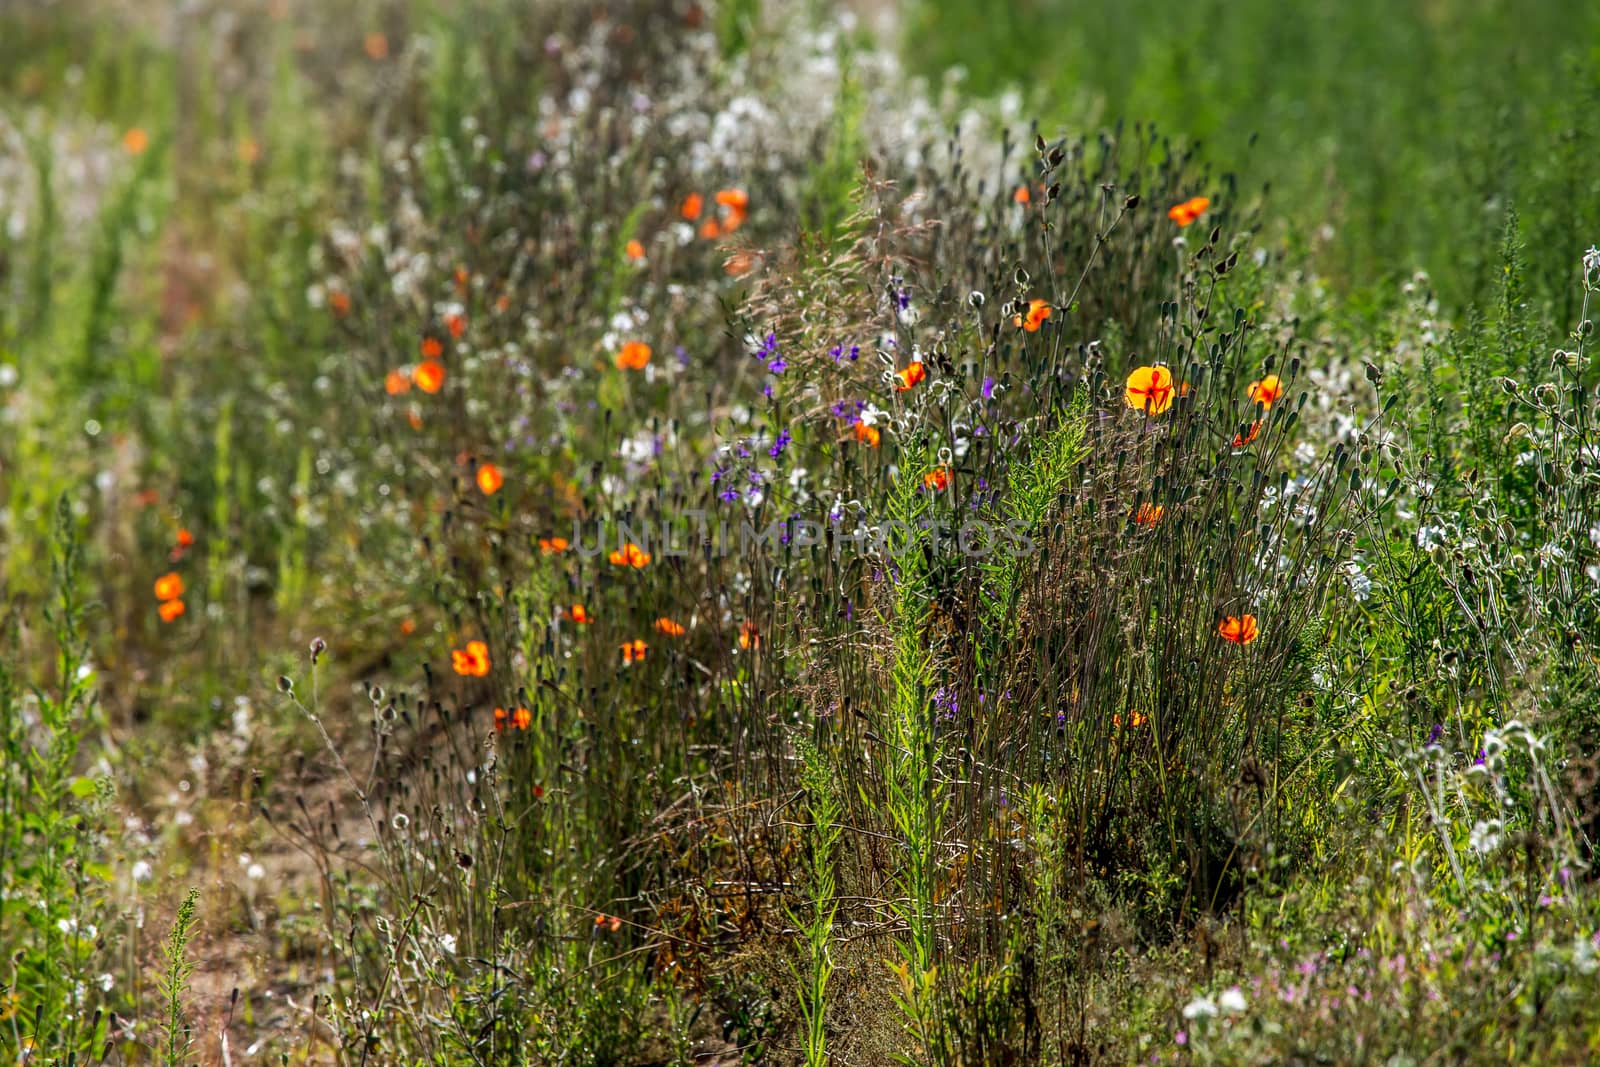 Blooming flowers on green grass at roadside. Meadow with wild flowers. Flowers is seed-bearing part of a plant, consisting of reproductive organs that are typically surrounded by a brightly coloured petals and green calyx. 

